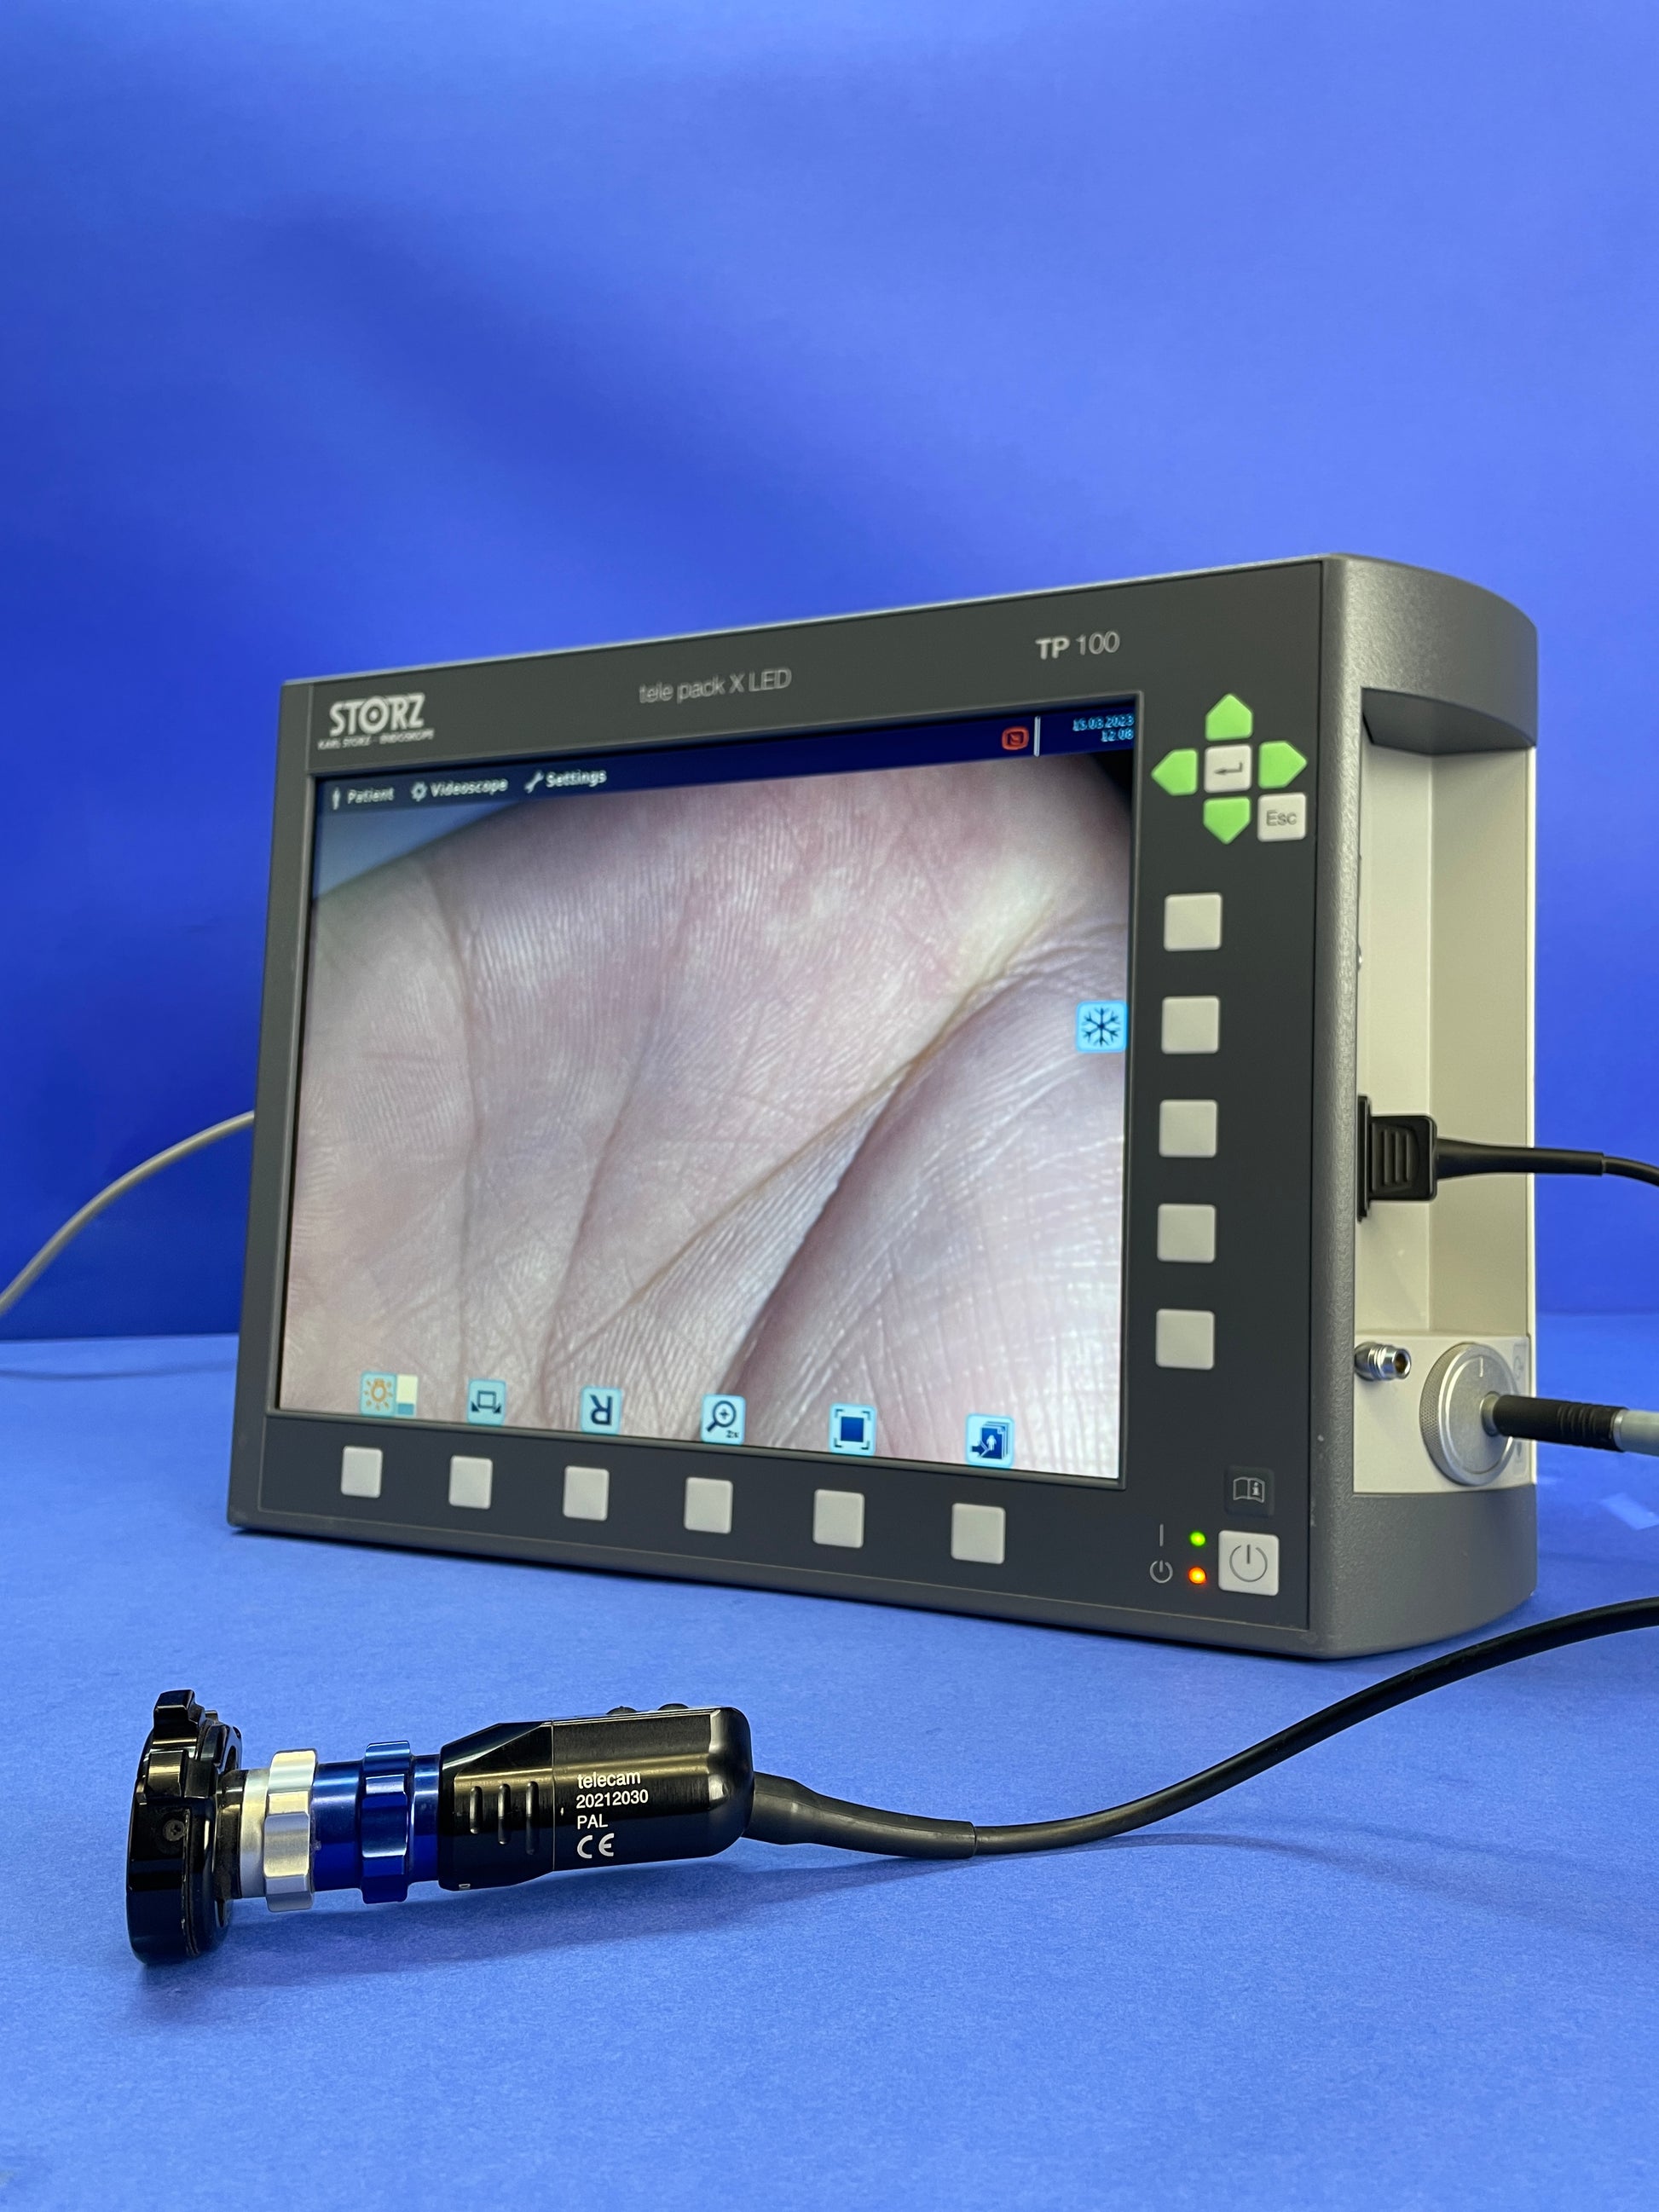 Storz Tele pack X  powers on and produces excellent images, when tested with Endoscope.